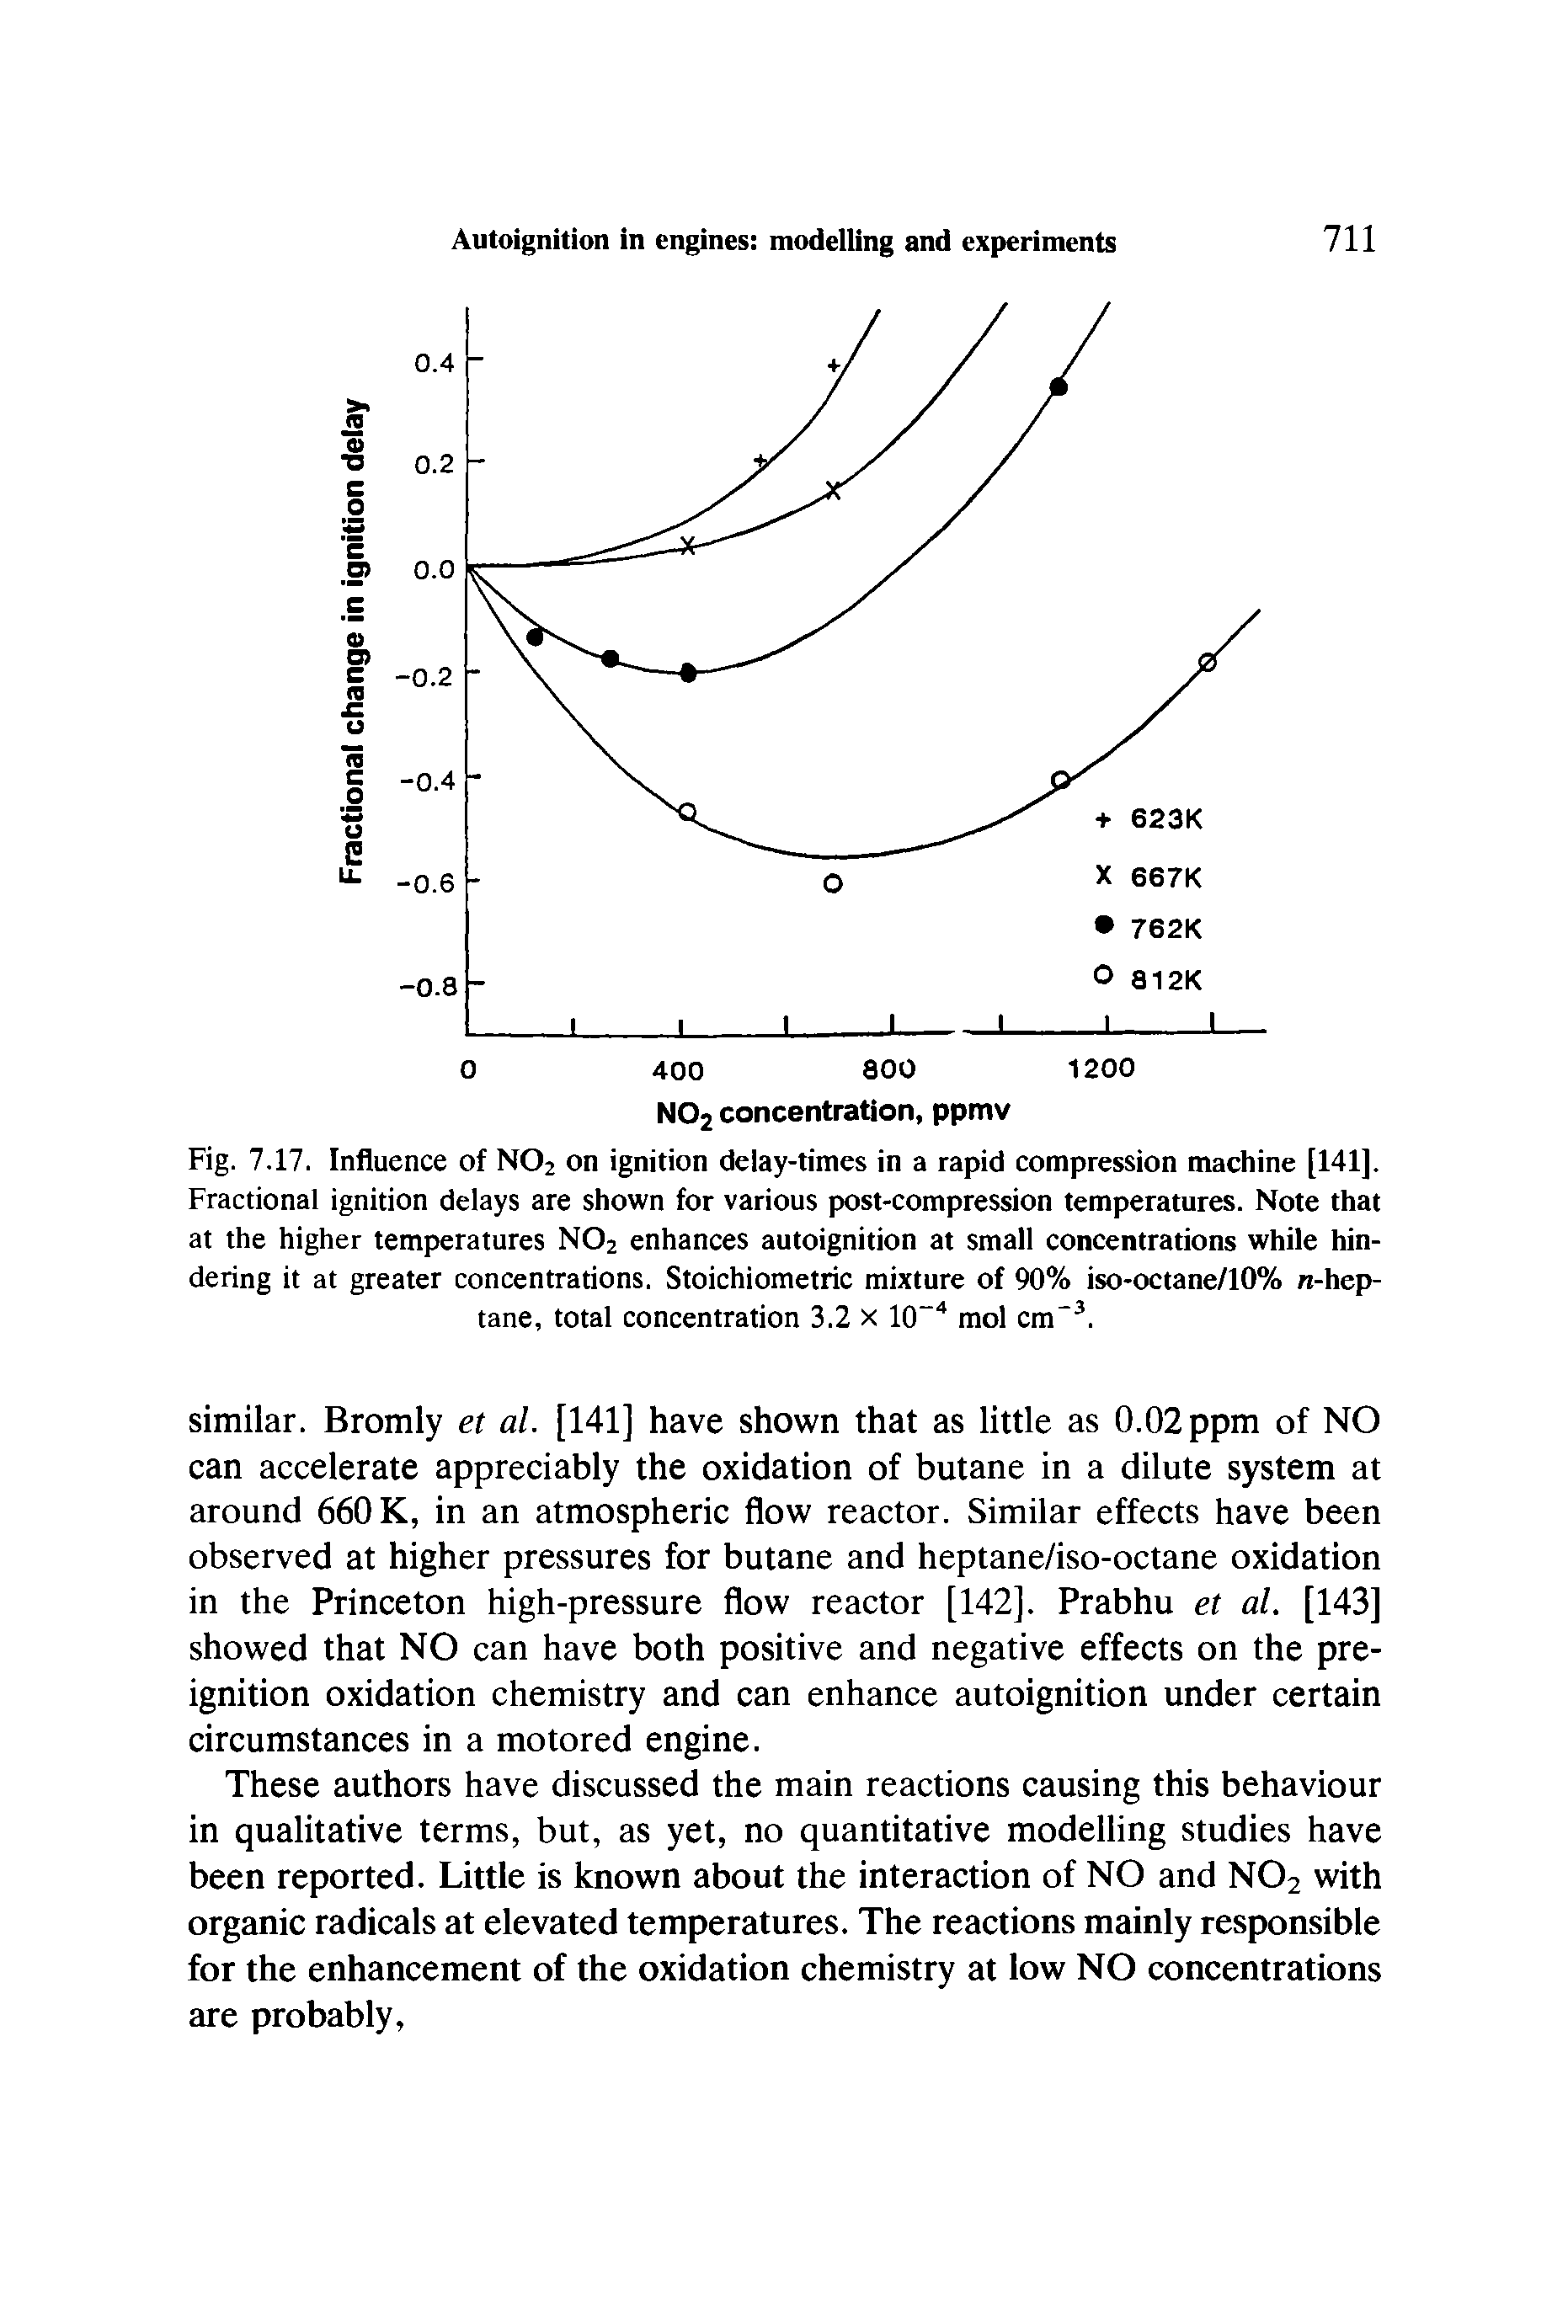 Fig. 7.17. Influence of NO2 on ignition delay-times in a rapid compression machine [141], Fractional ignition delays are shown for various post-compression temperatures. Note that at the higher temperatures NO2 enhances autoignition at small concentrations while hindering it at greater concentrations. Stoichiometric mixture of 90% iso-octane/10% n-hep-tane, total concentration 3.2 x 10 mol cm . ...